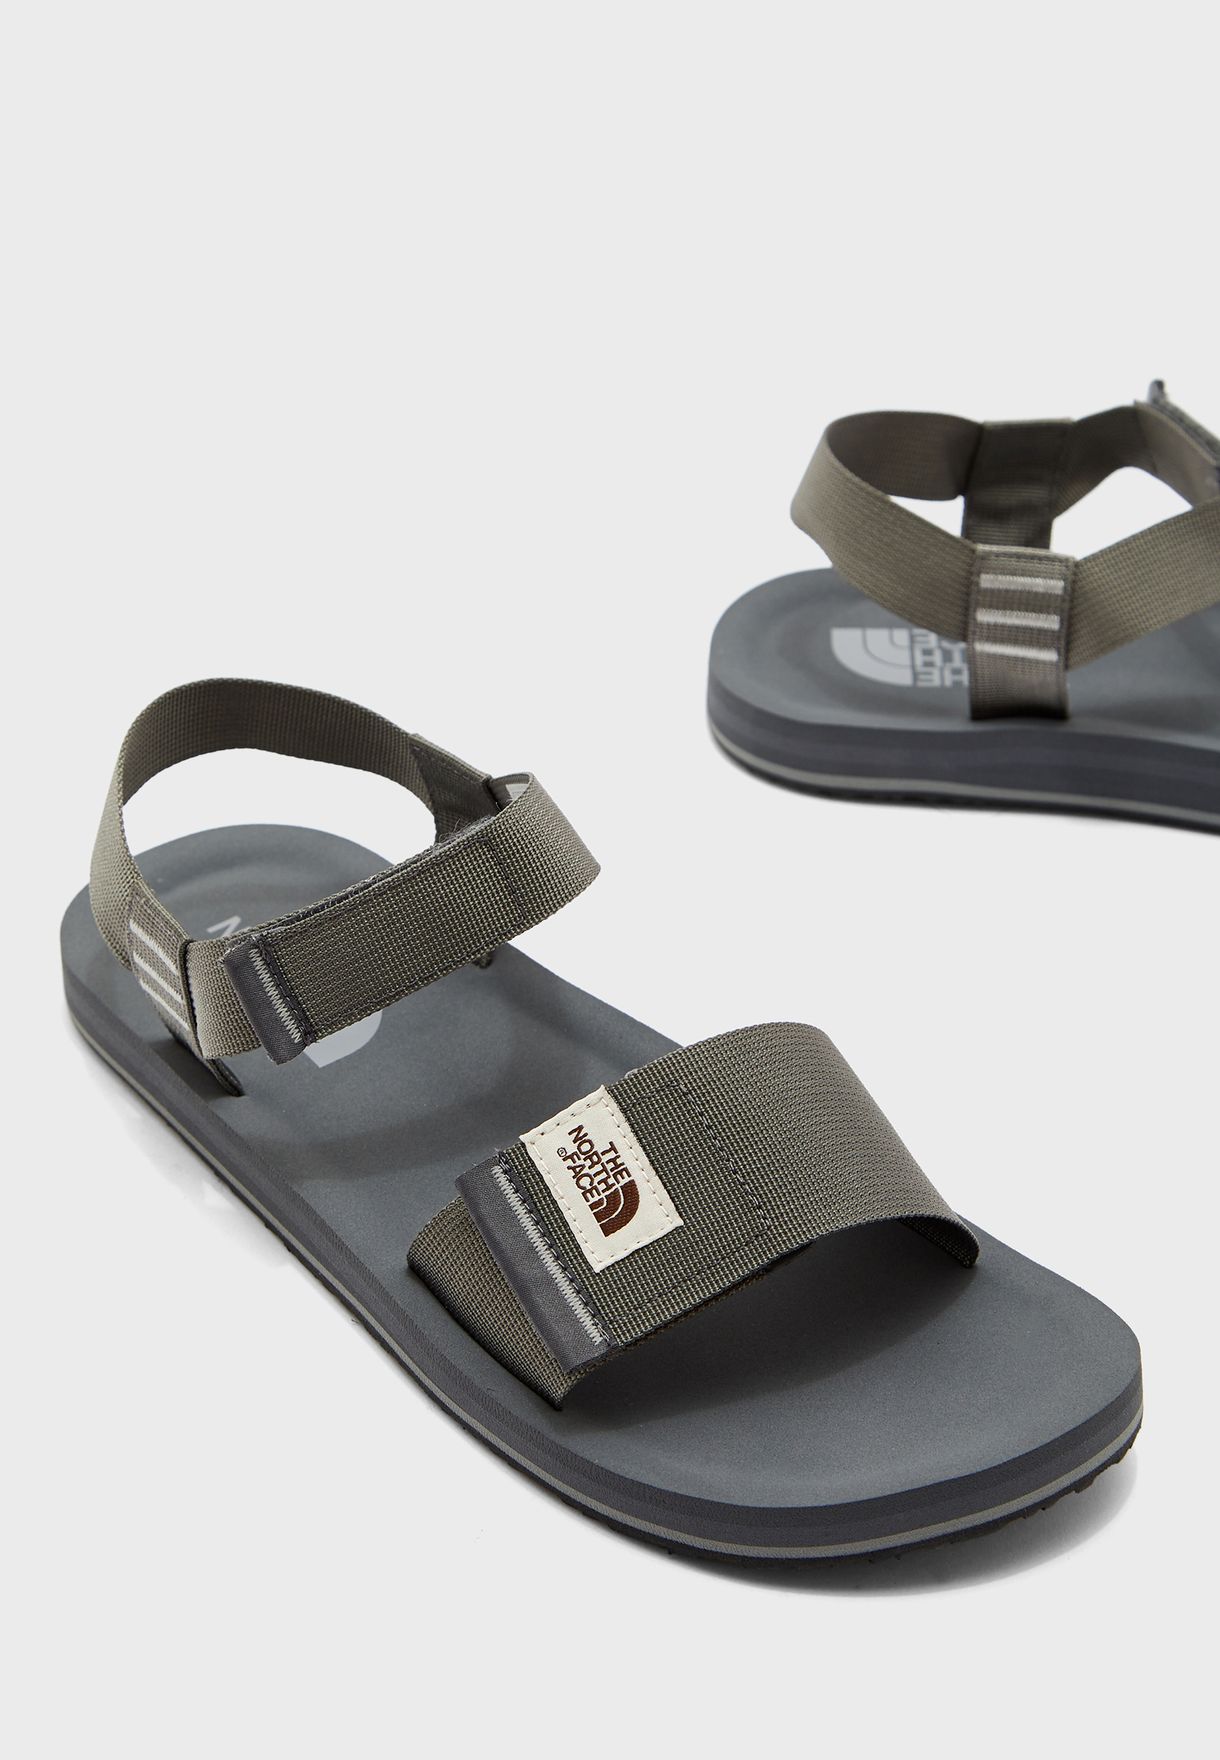 north face sandals